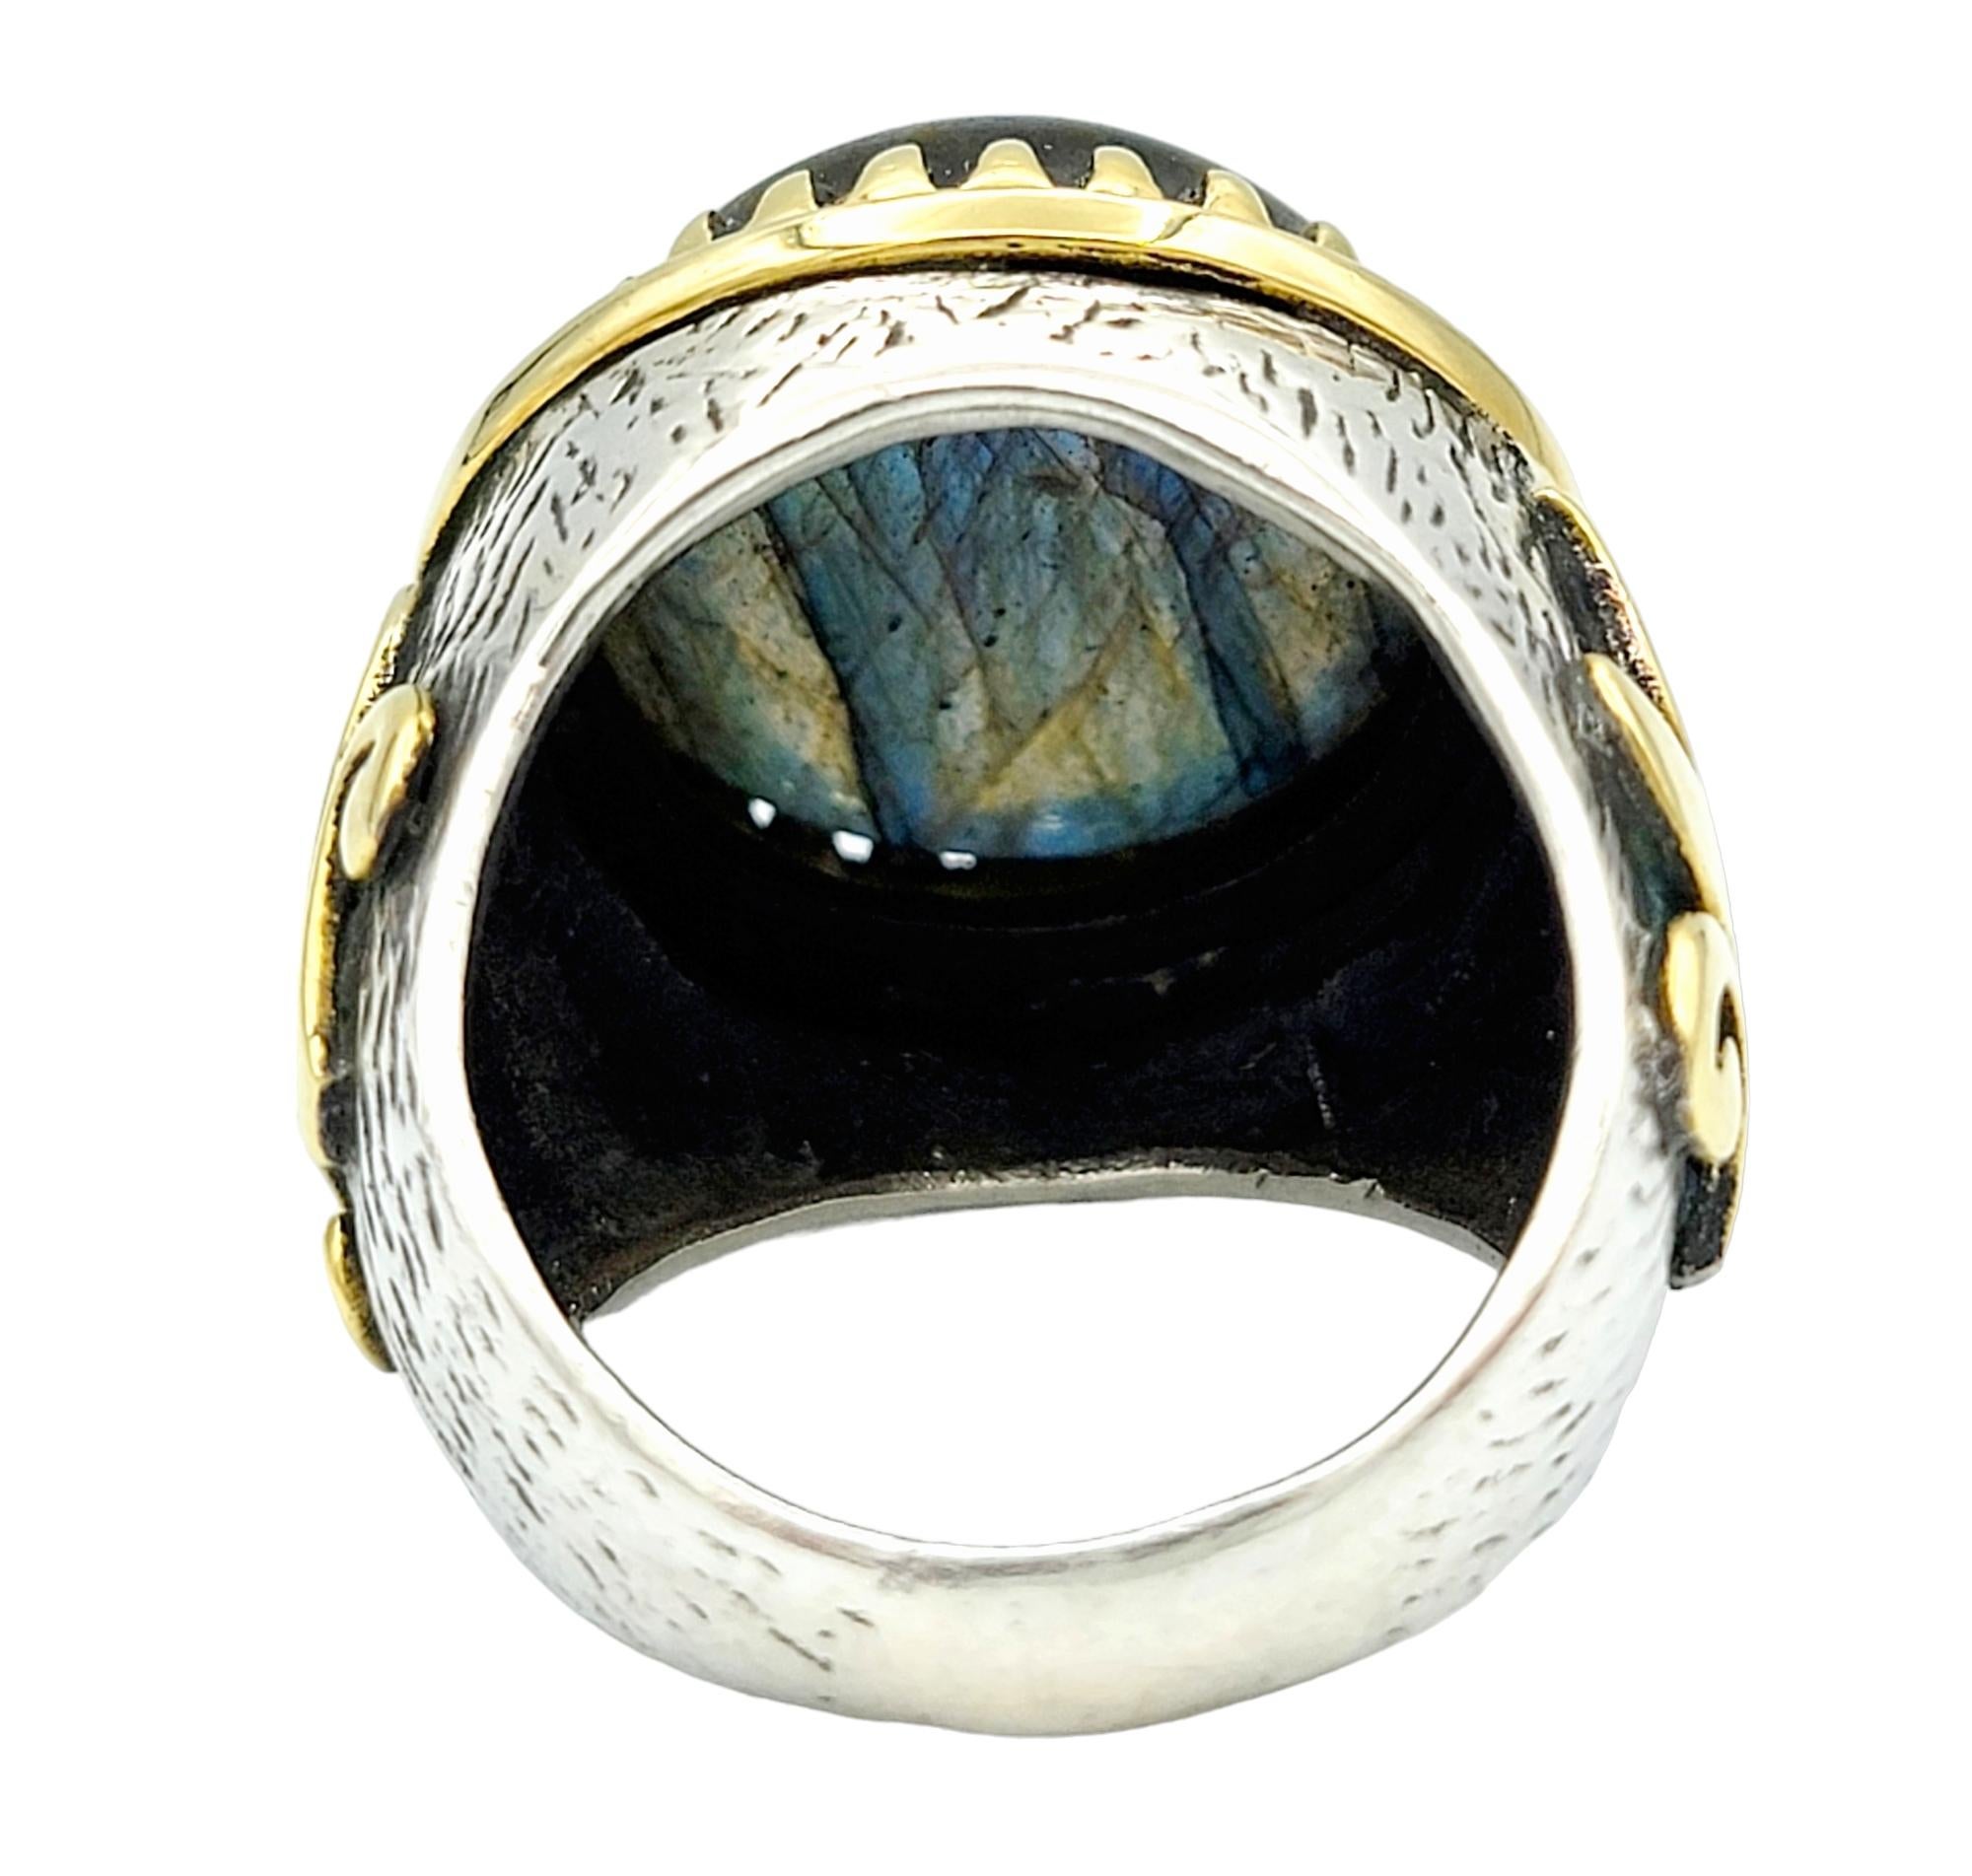 5.84 Carat Round Blue Labradorite Cabochon Cocktail Ring in Silver and Gold For Sale 2